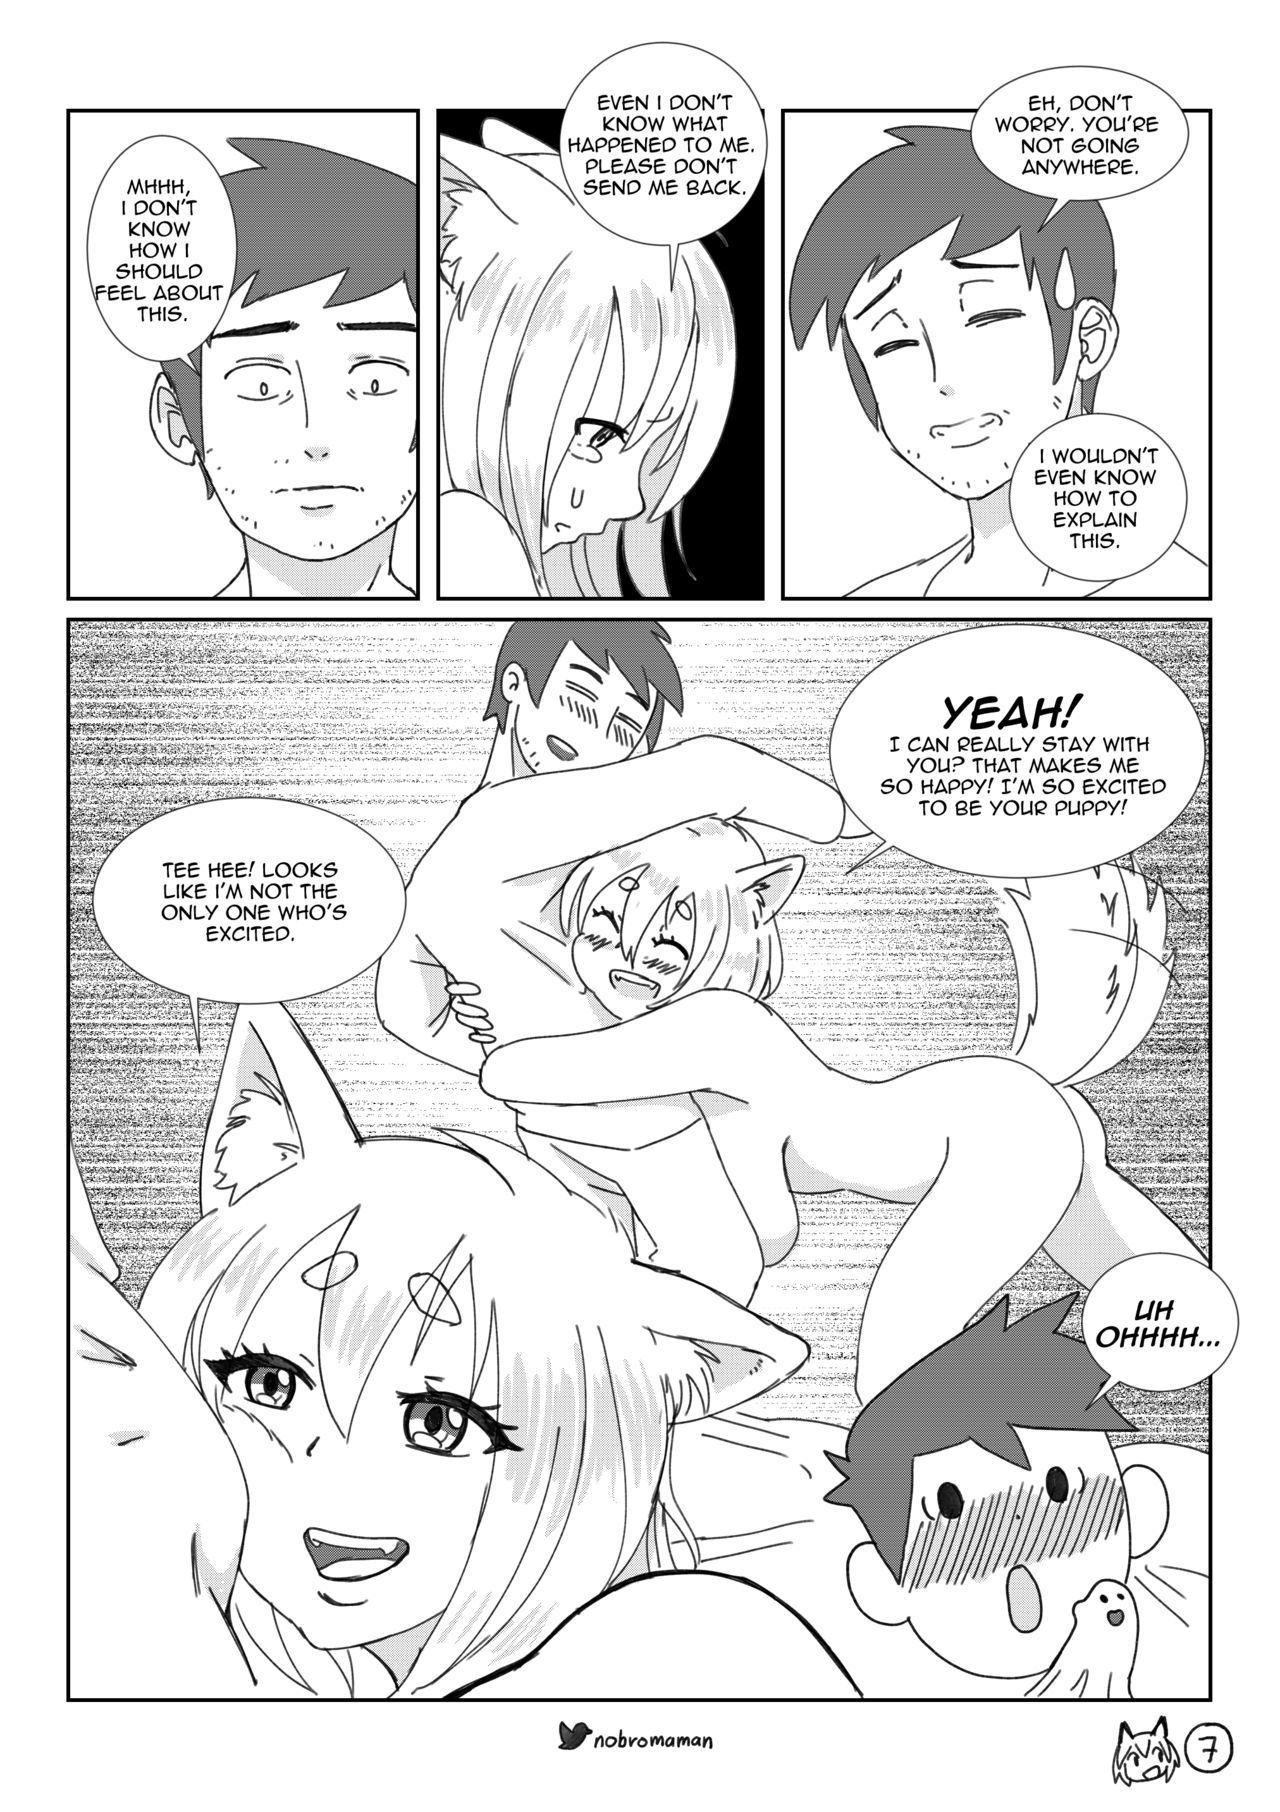 Life with a dog girl - Chapter1 (ongoing) 7